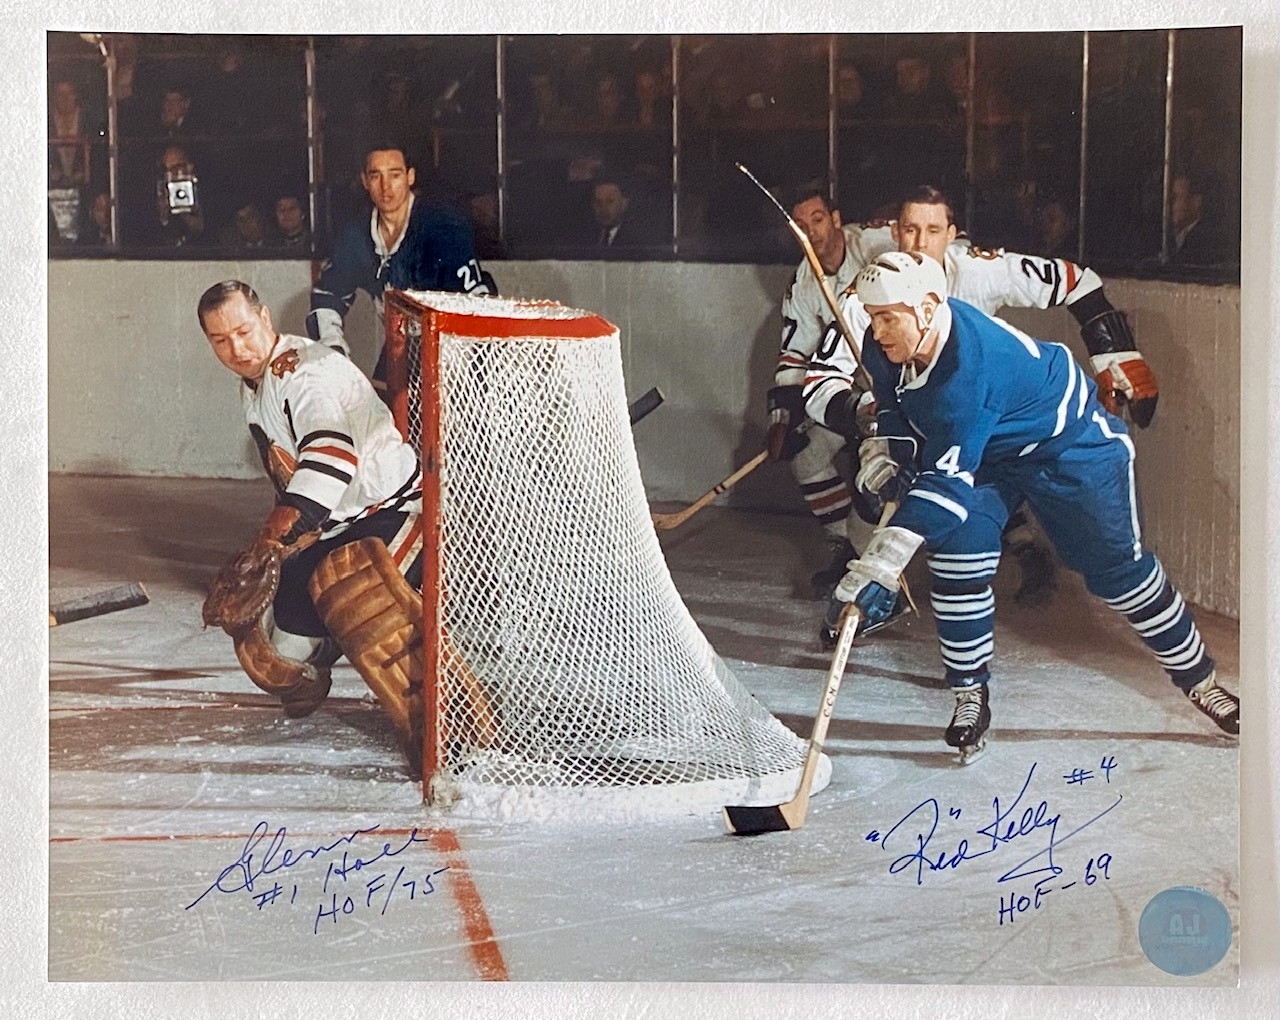 Glenn Hall vs Red Kelly Dual Signed Original 6 Rivalry 8x10 Photo With HOF Notes